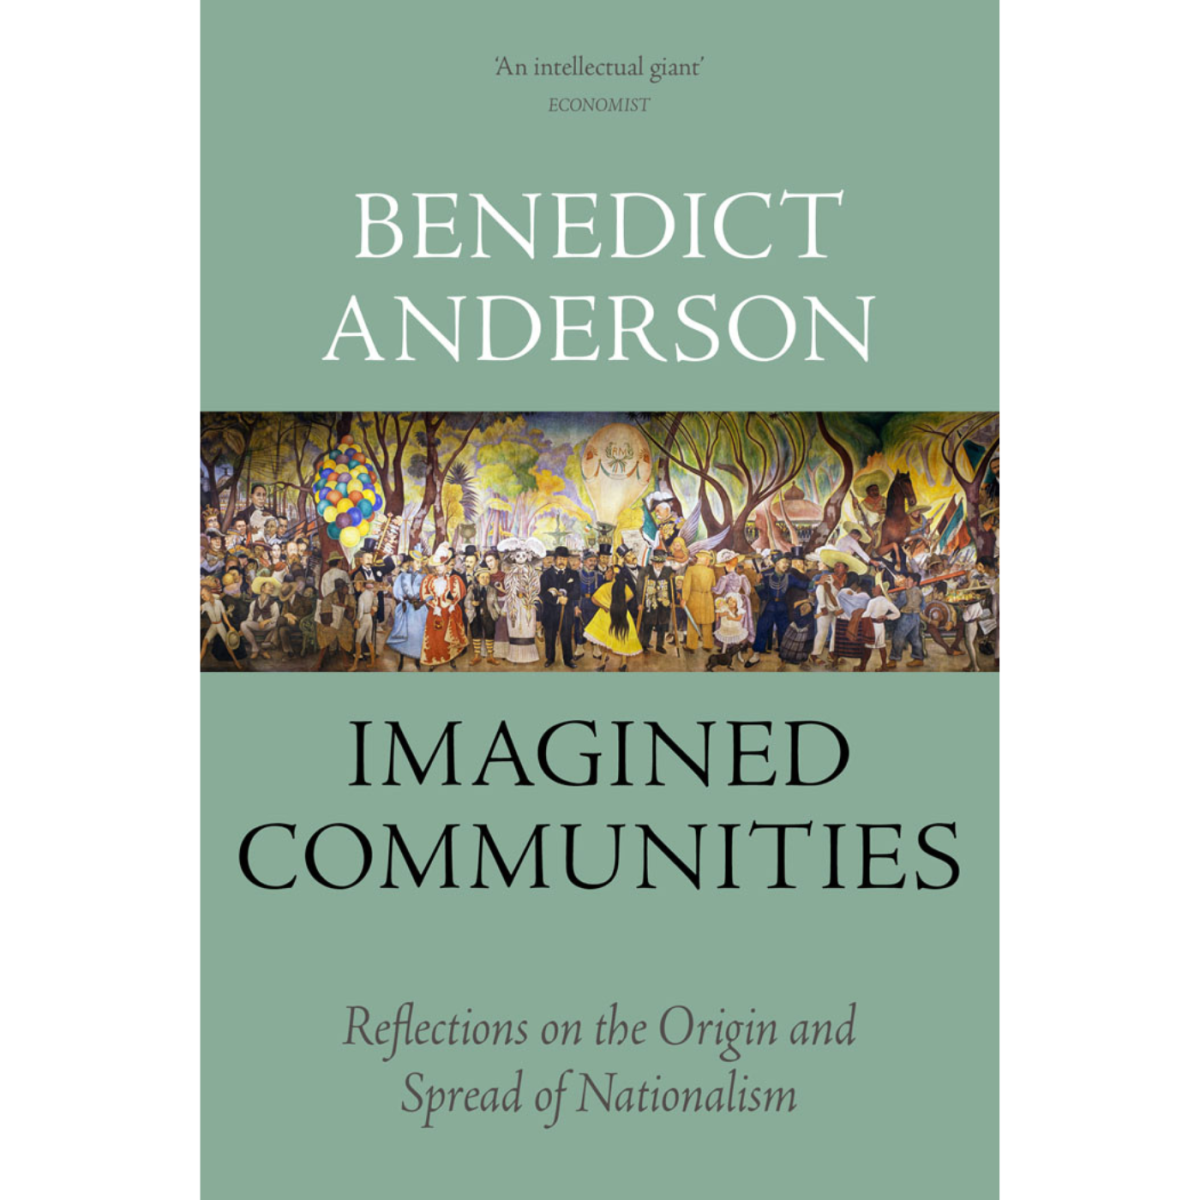 The book entitled Imagined Communities, first published in 1983, is written by Benedict Anderson.